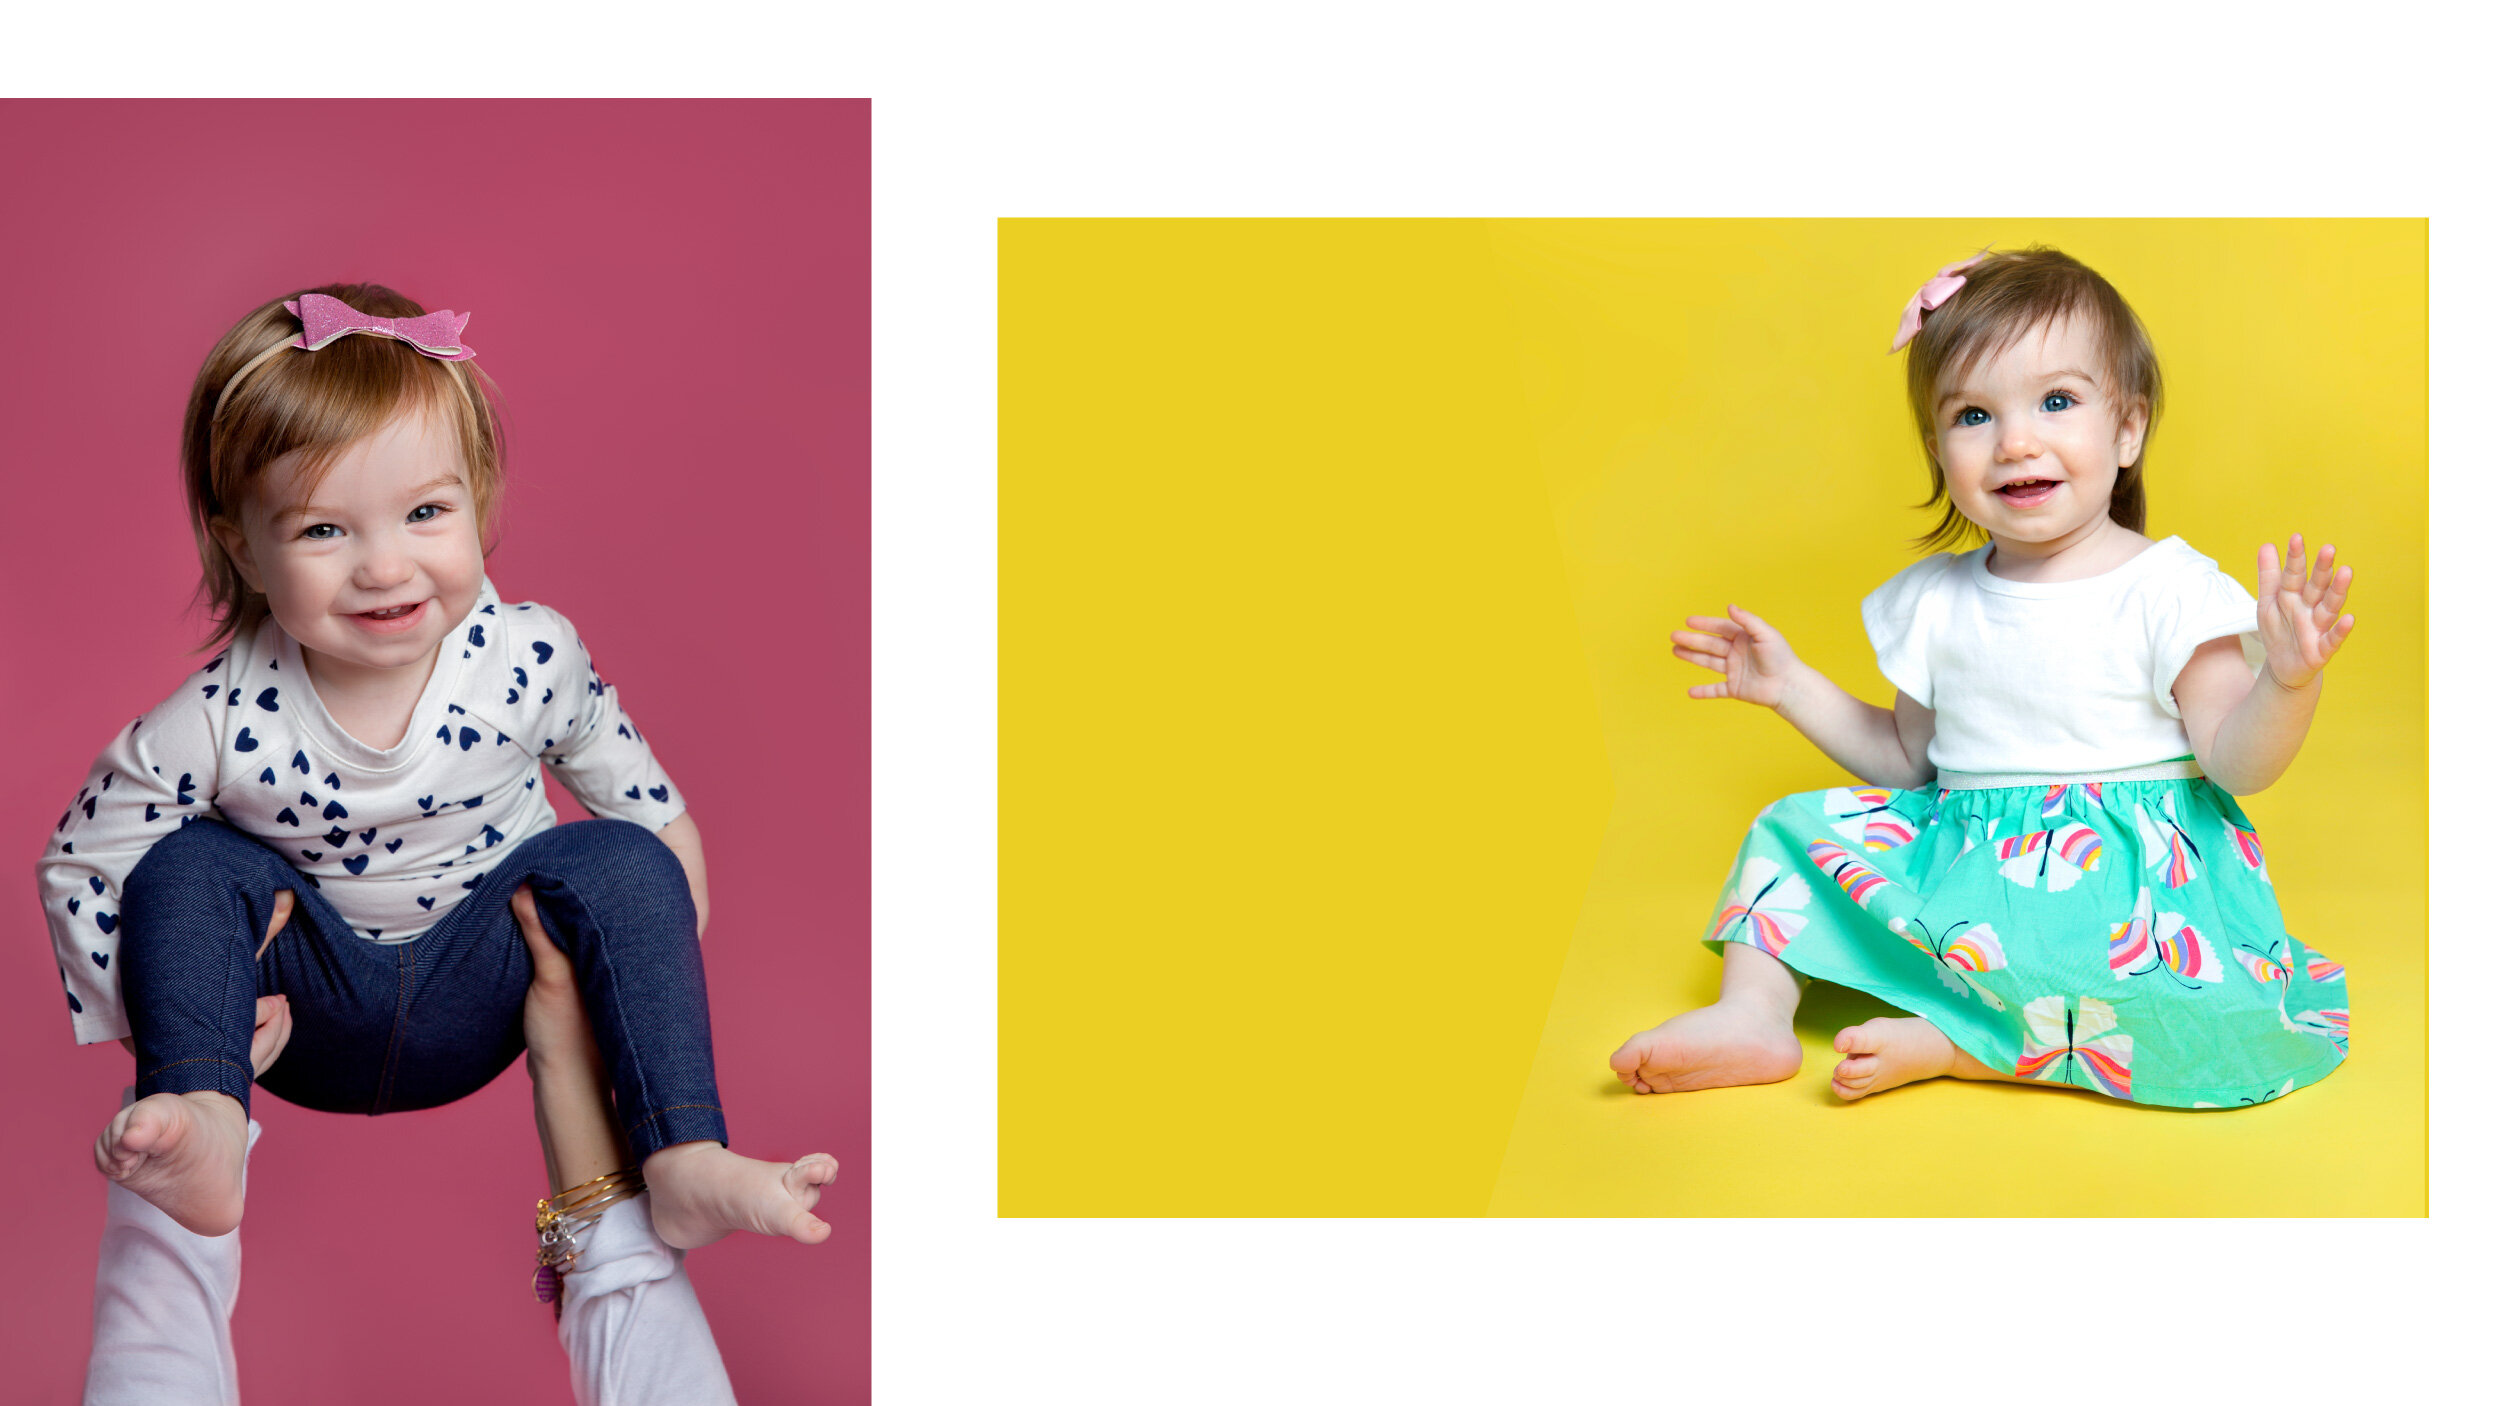  Two photos of girl toddler modeling clothing. On the left she is in front of a pink backdrop wearing black tights and a white shirt with hearts. On the right she is sitting on the floor in front of a yellow backdrop in a spring dress.  